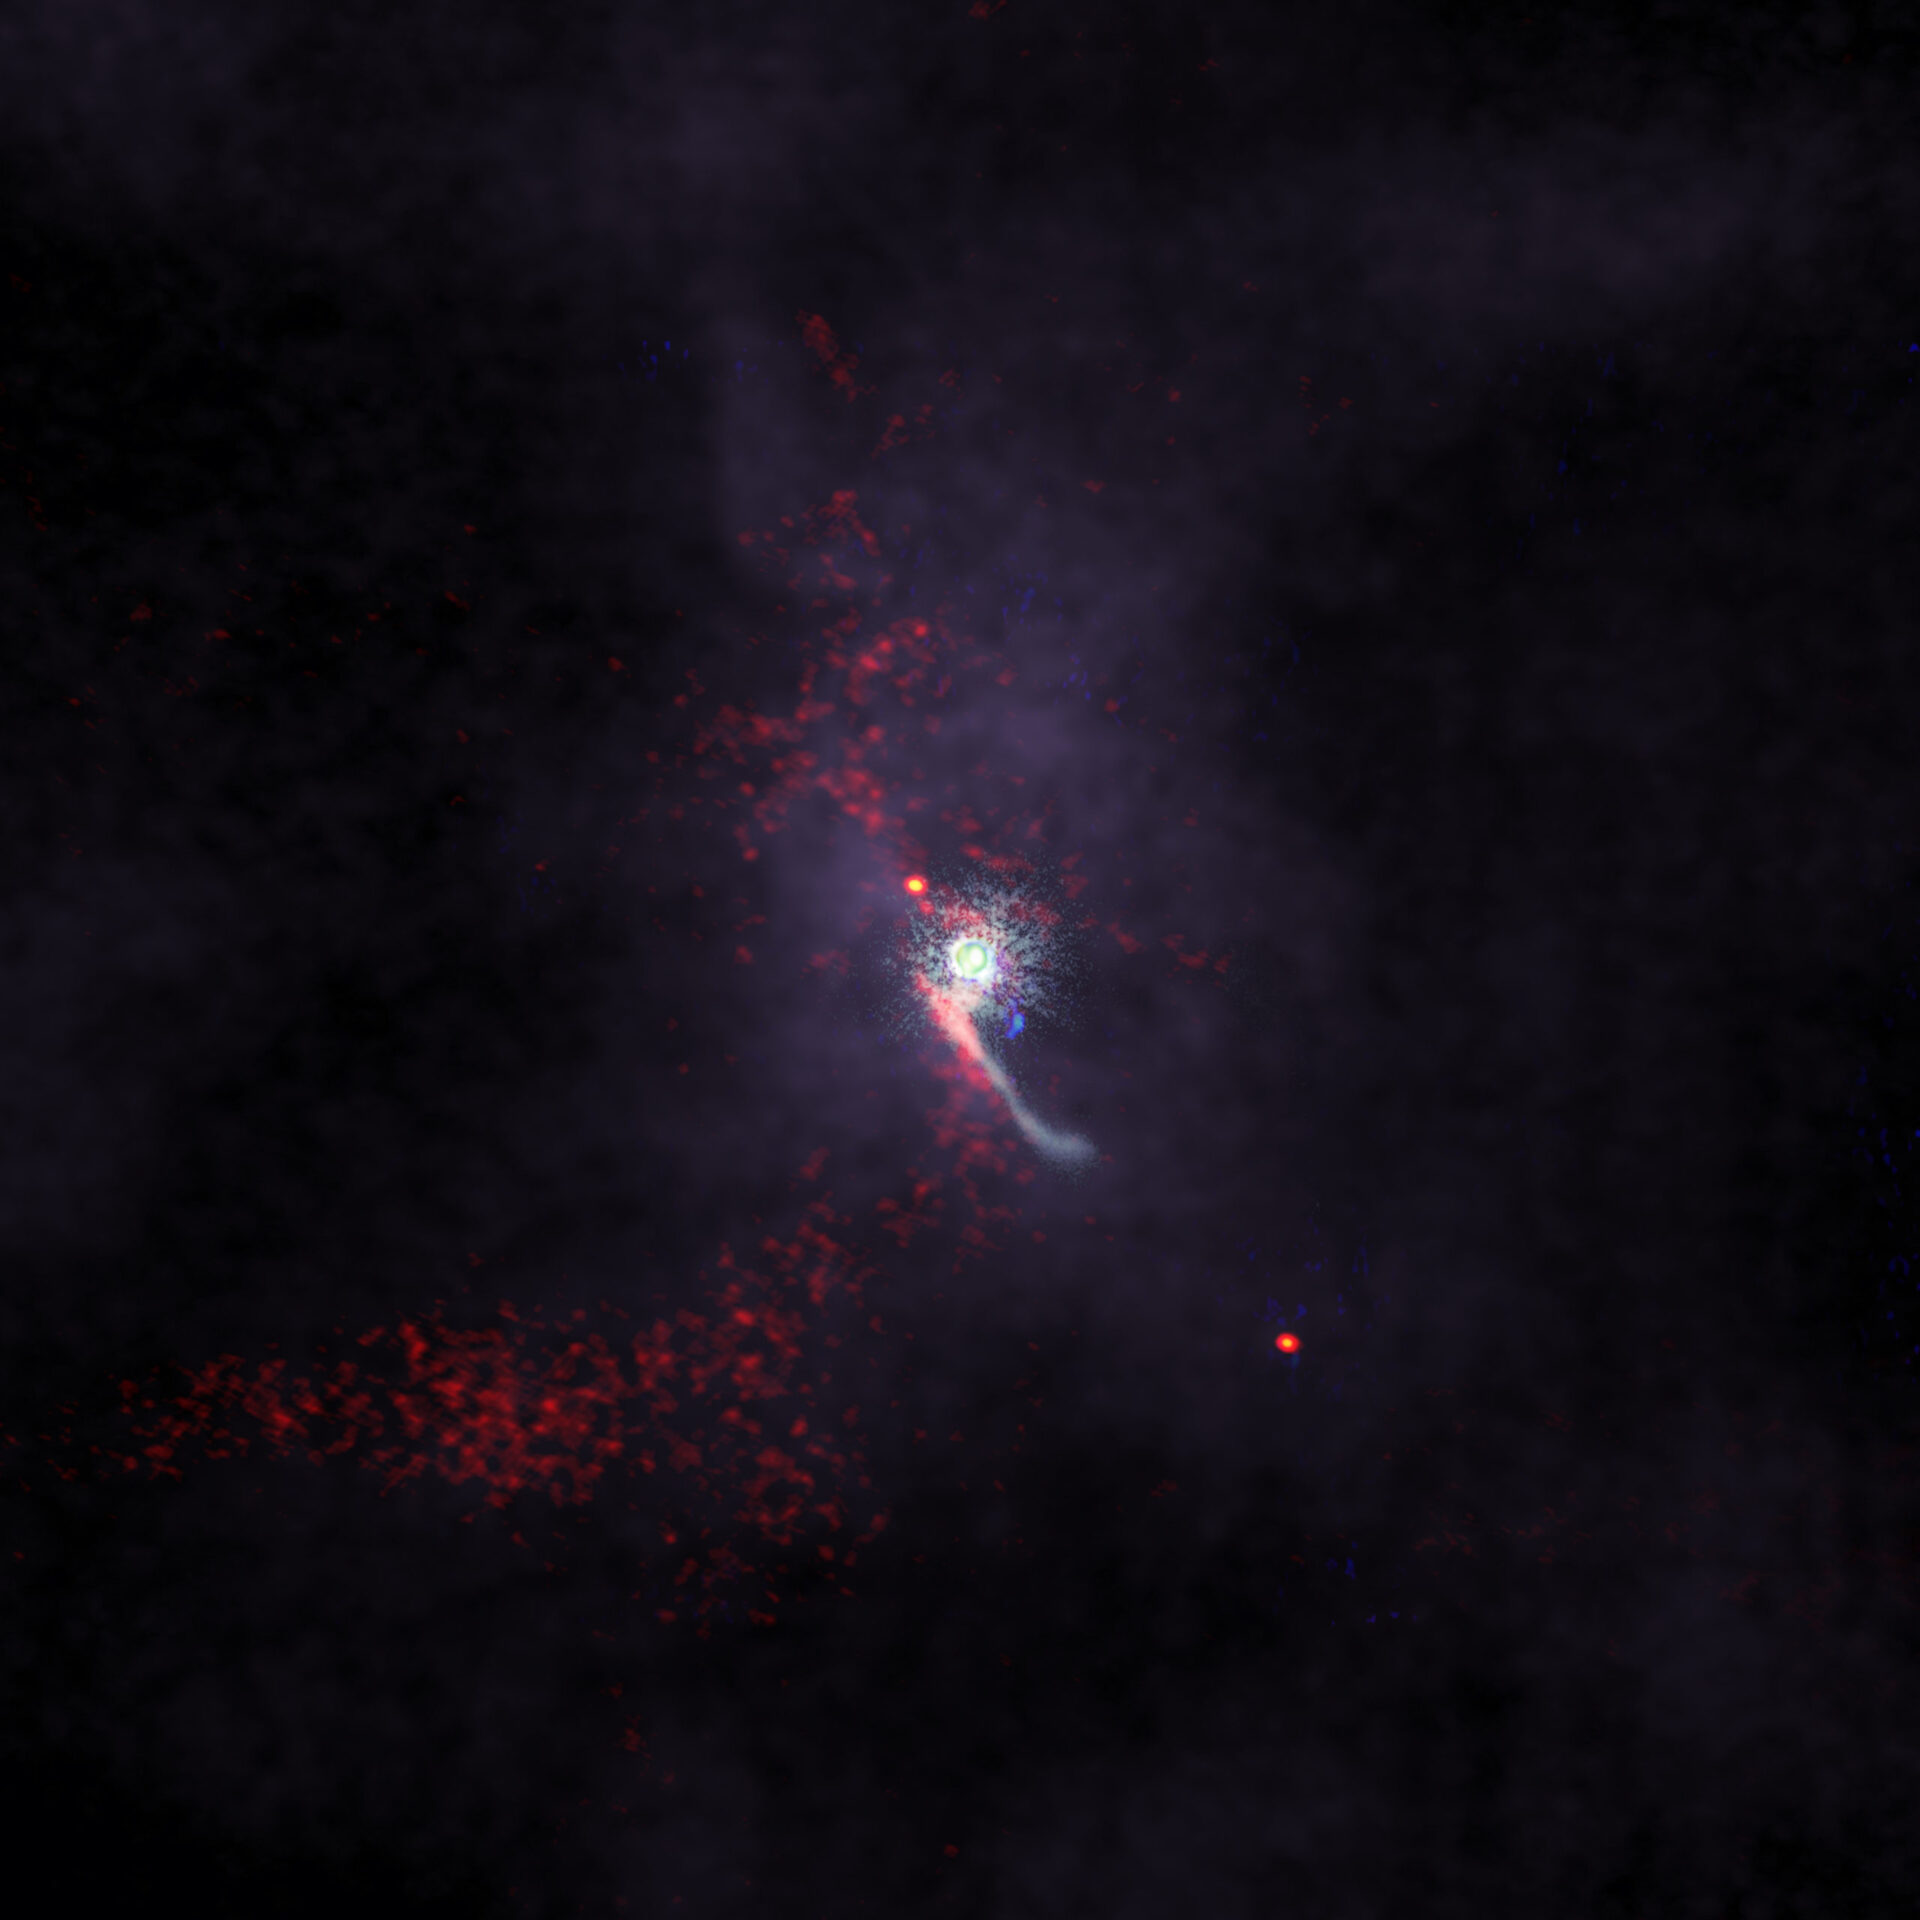 <p>Scientists have made the first comprehensive multi-wavelength observational study of an intruder object disturbing the protoplanetary disk—or birthplace of planets—surrounding the Z Canis Majoris star (Z CMa) in the constellation Canis Major. This composite image includes data from the Subaru Telescope, Jansky Very Large Array, and the Atacama Large Millimeter/submillimeter Array, revealing in detail the perturbations, including long streams of material, made in Z CMa’s protoplanetary disk by the intruding object.</p>
<p>Credit: ALMA (ESO/NAOJ/NRAO), S. Dagnello (NRAO/AUI/NSF), NAOJ</p>
